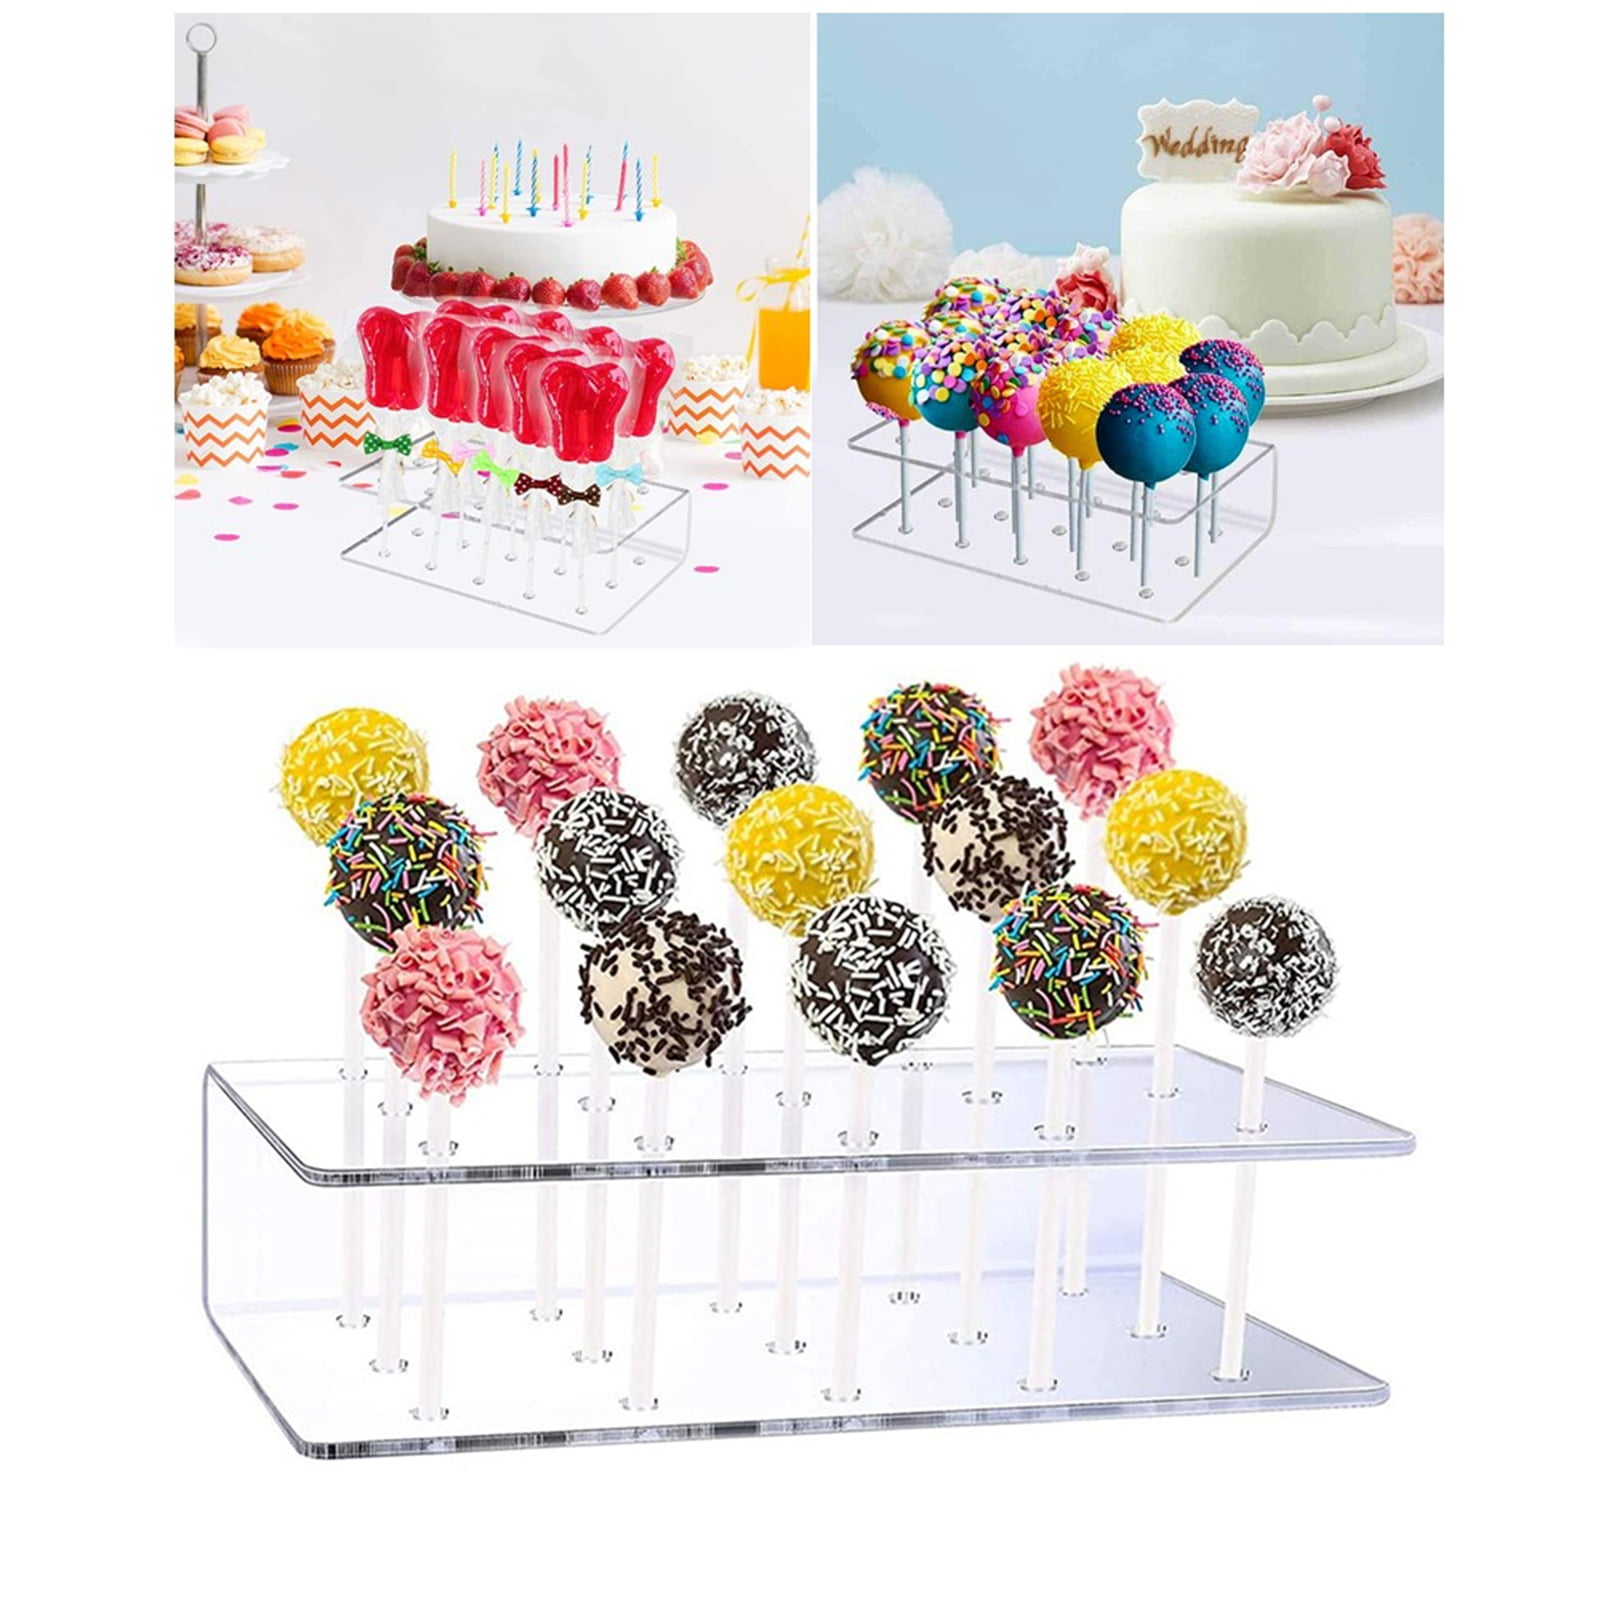 60 Hole Wooden Lollipop Holder Candy Table Display Decorative Dessert Stand for Wedding Birthday Baby Shower Parties Sturdy and Easy to Assemble Nangor Wood Cake Pop Stand